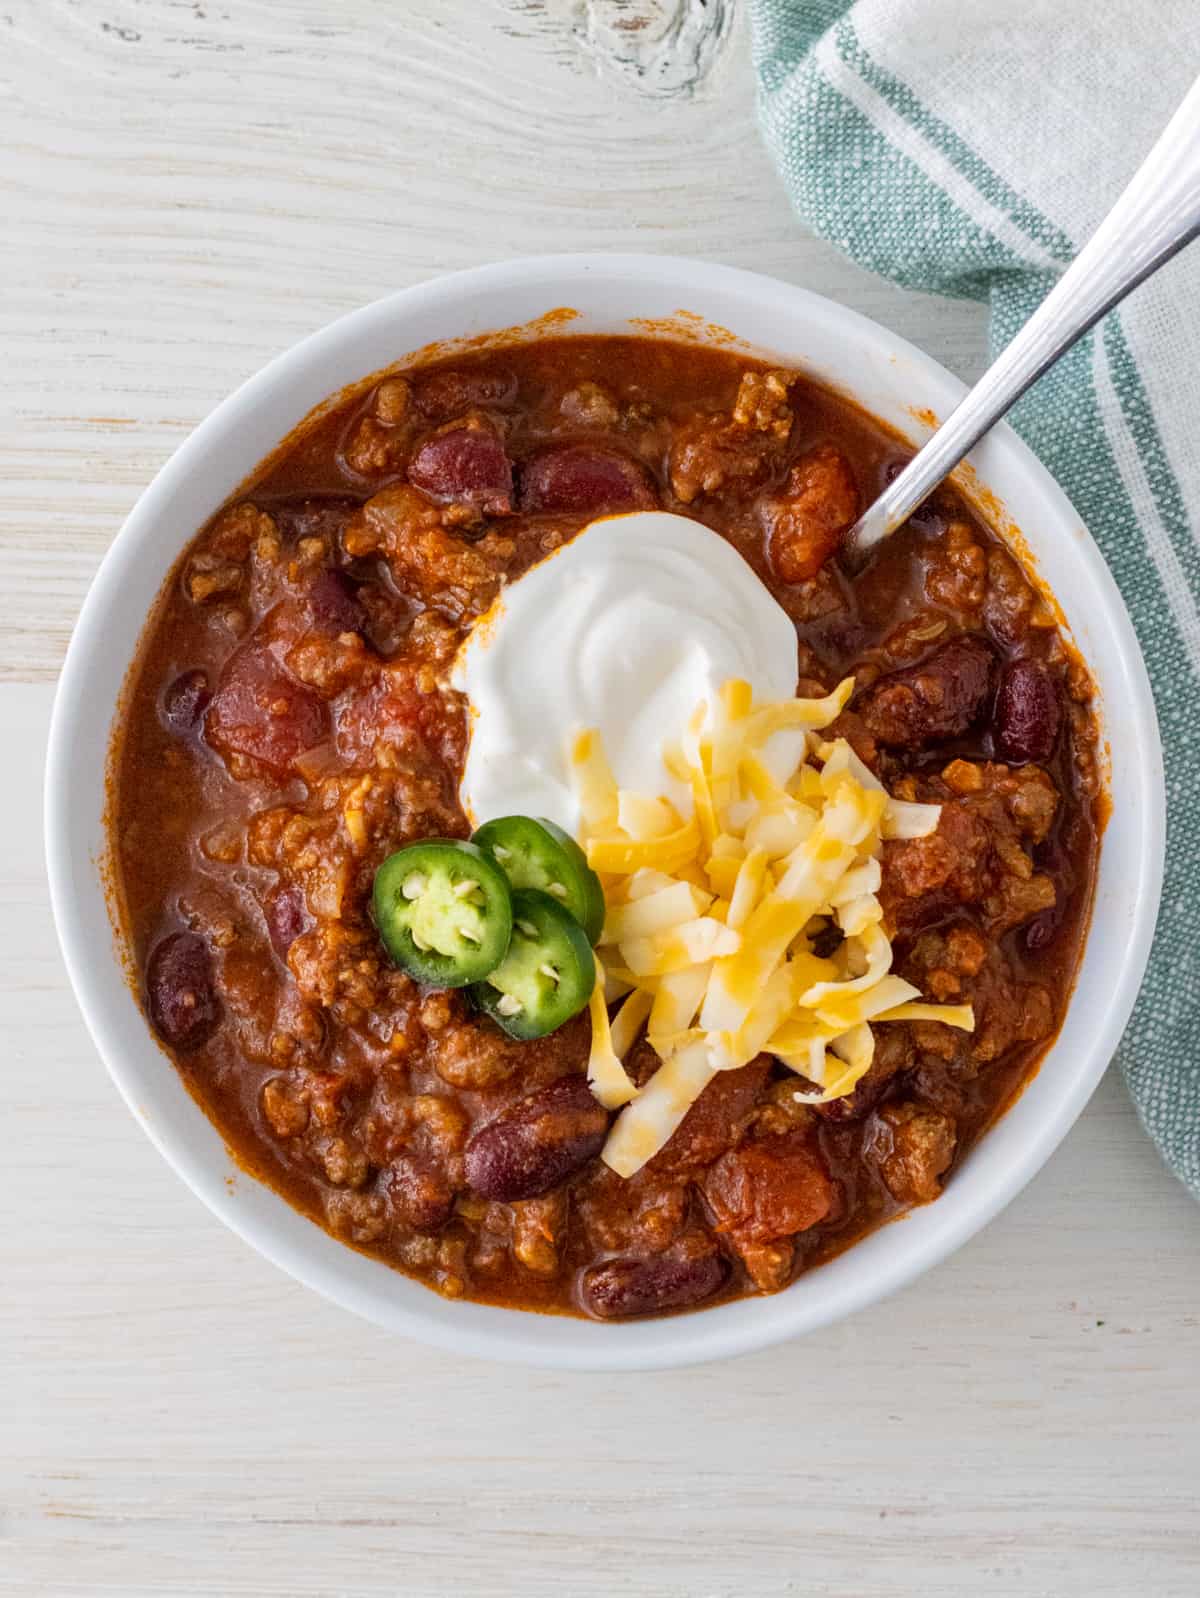 Bowl of chili topped with sour cream, shredded cheese, and jalapeno slices.